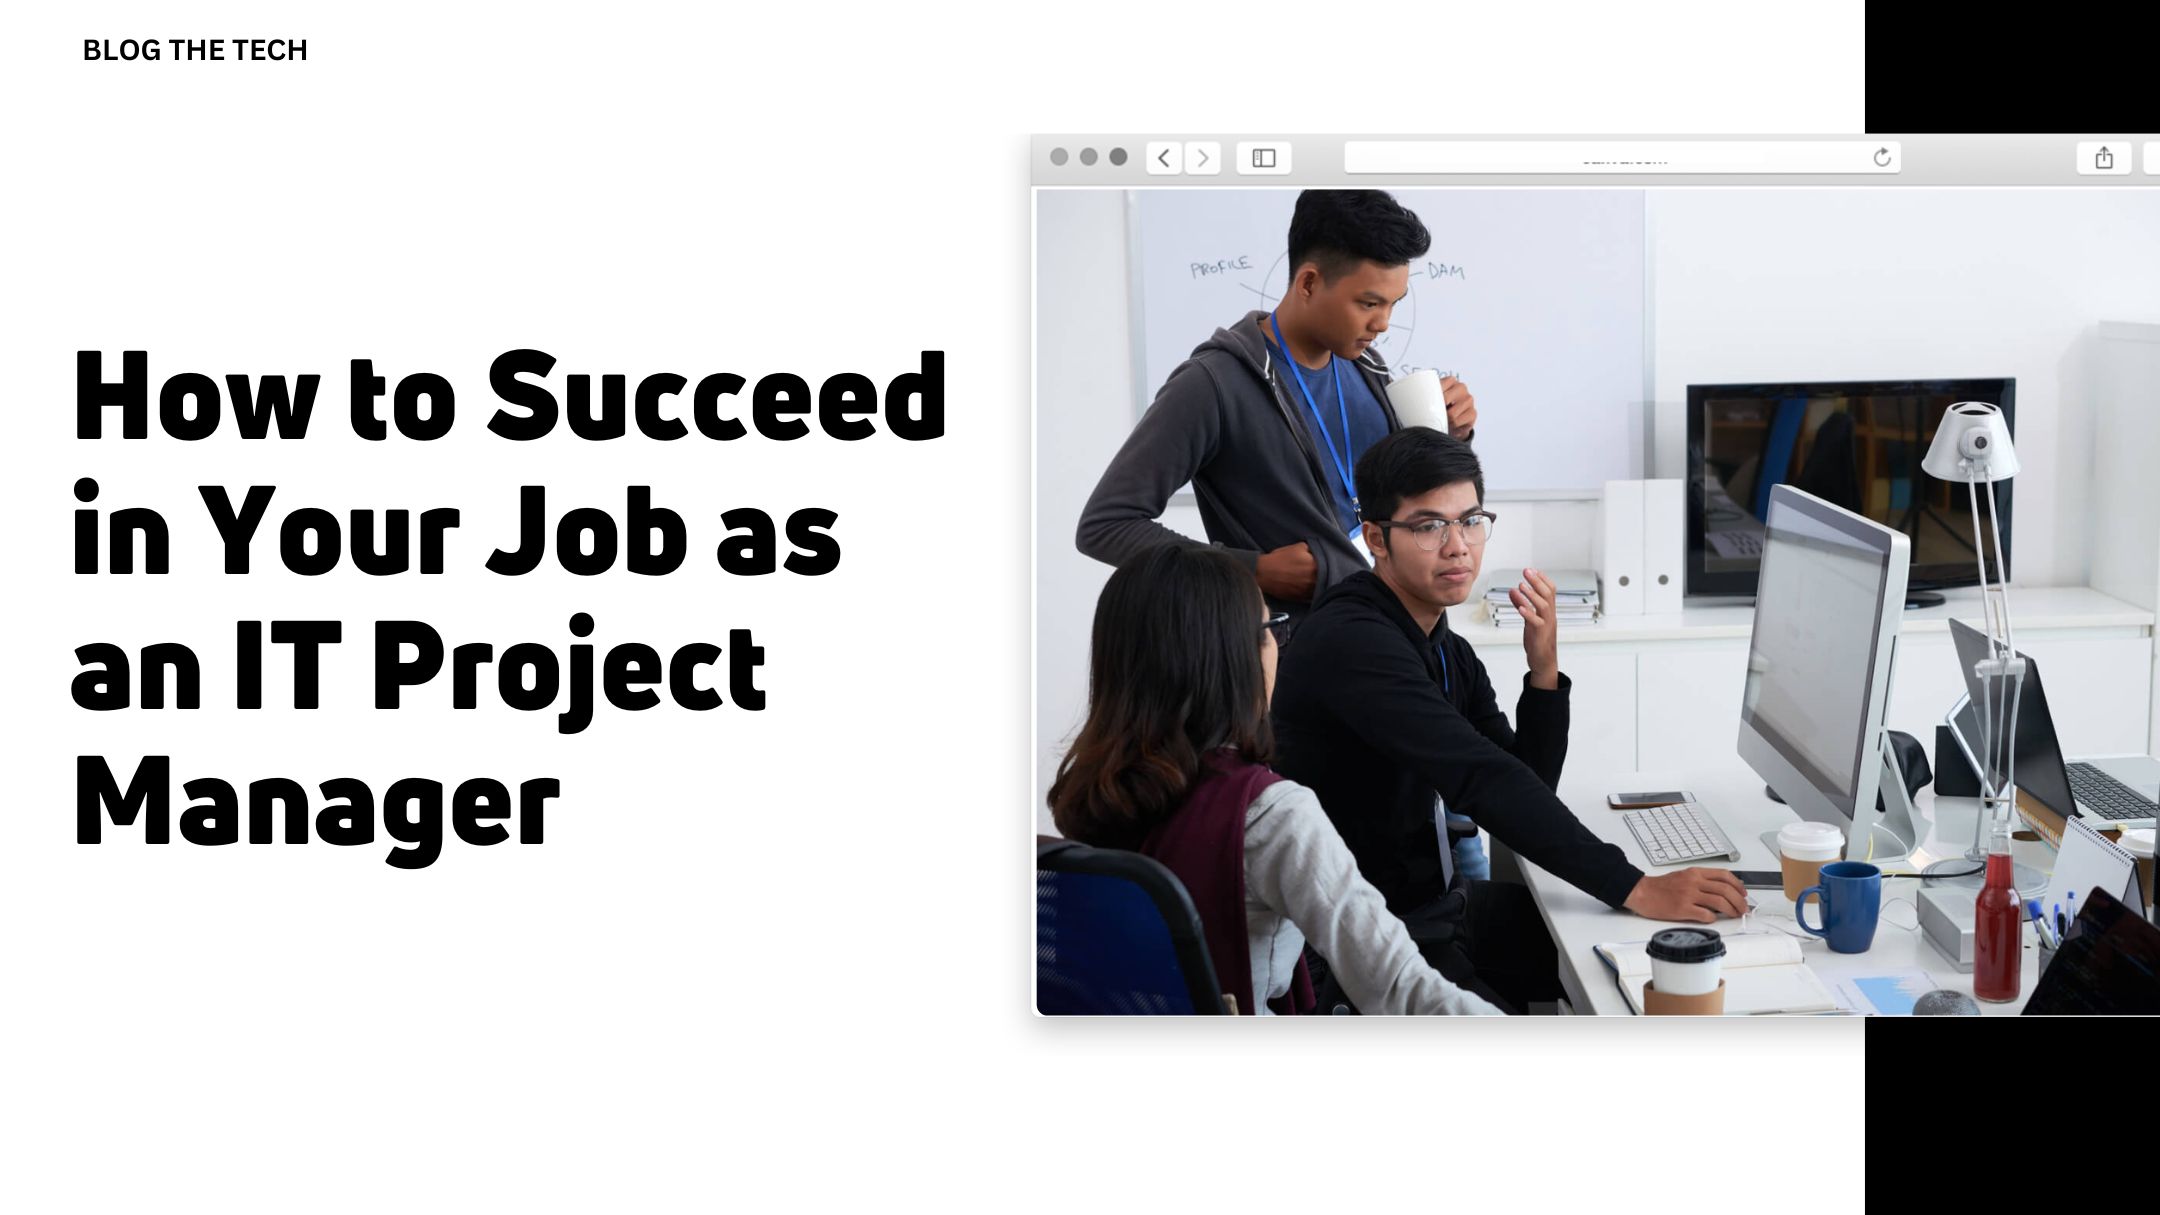 How to Succeed in Your Job as an IT Project Manager